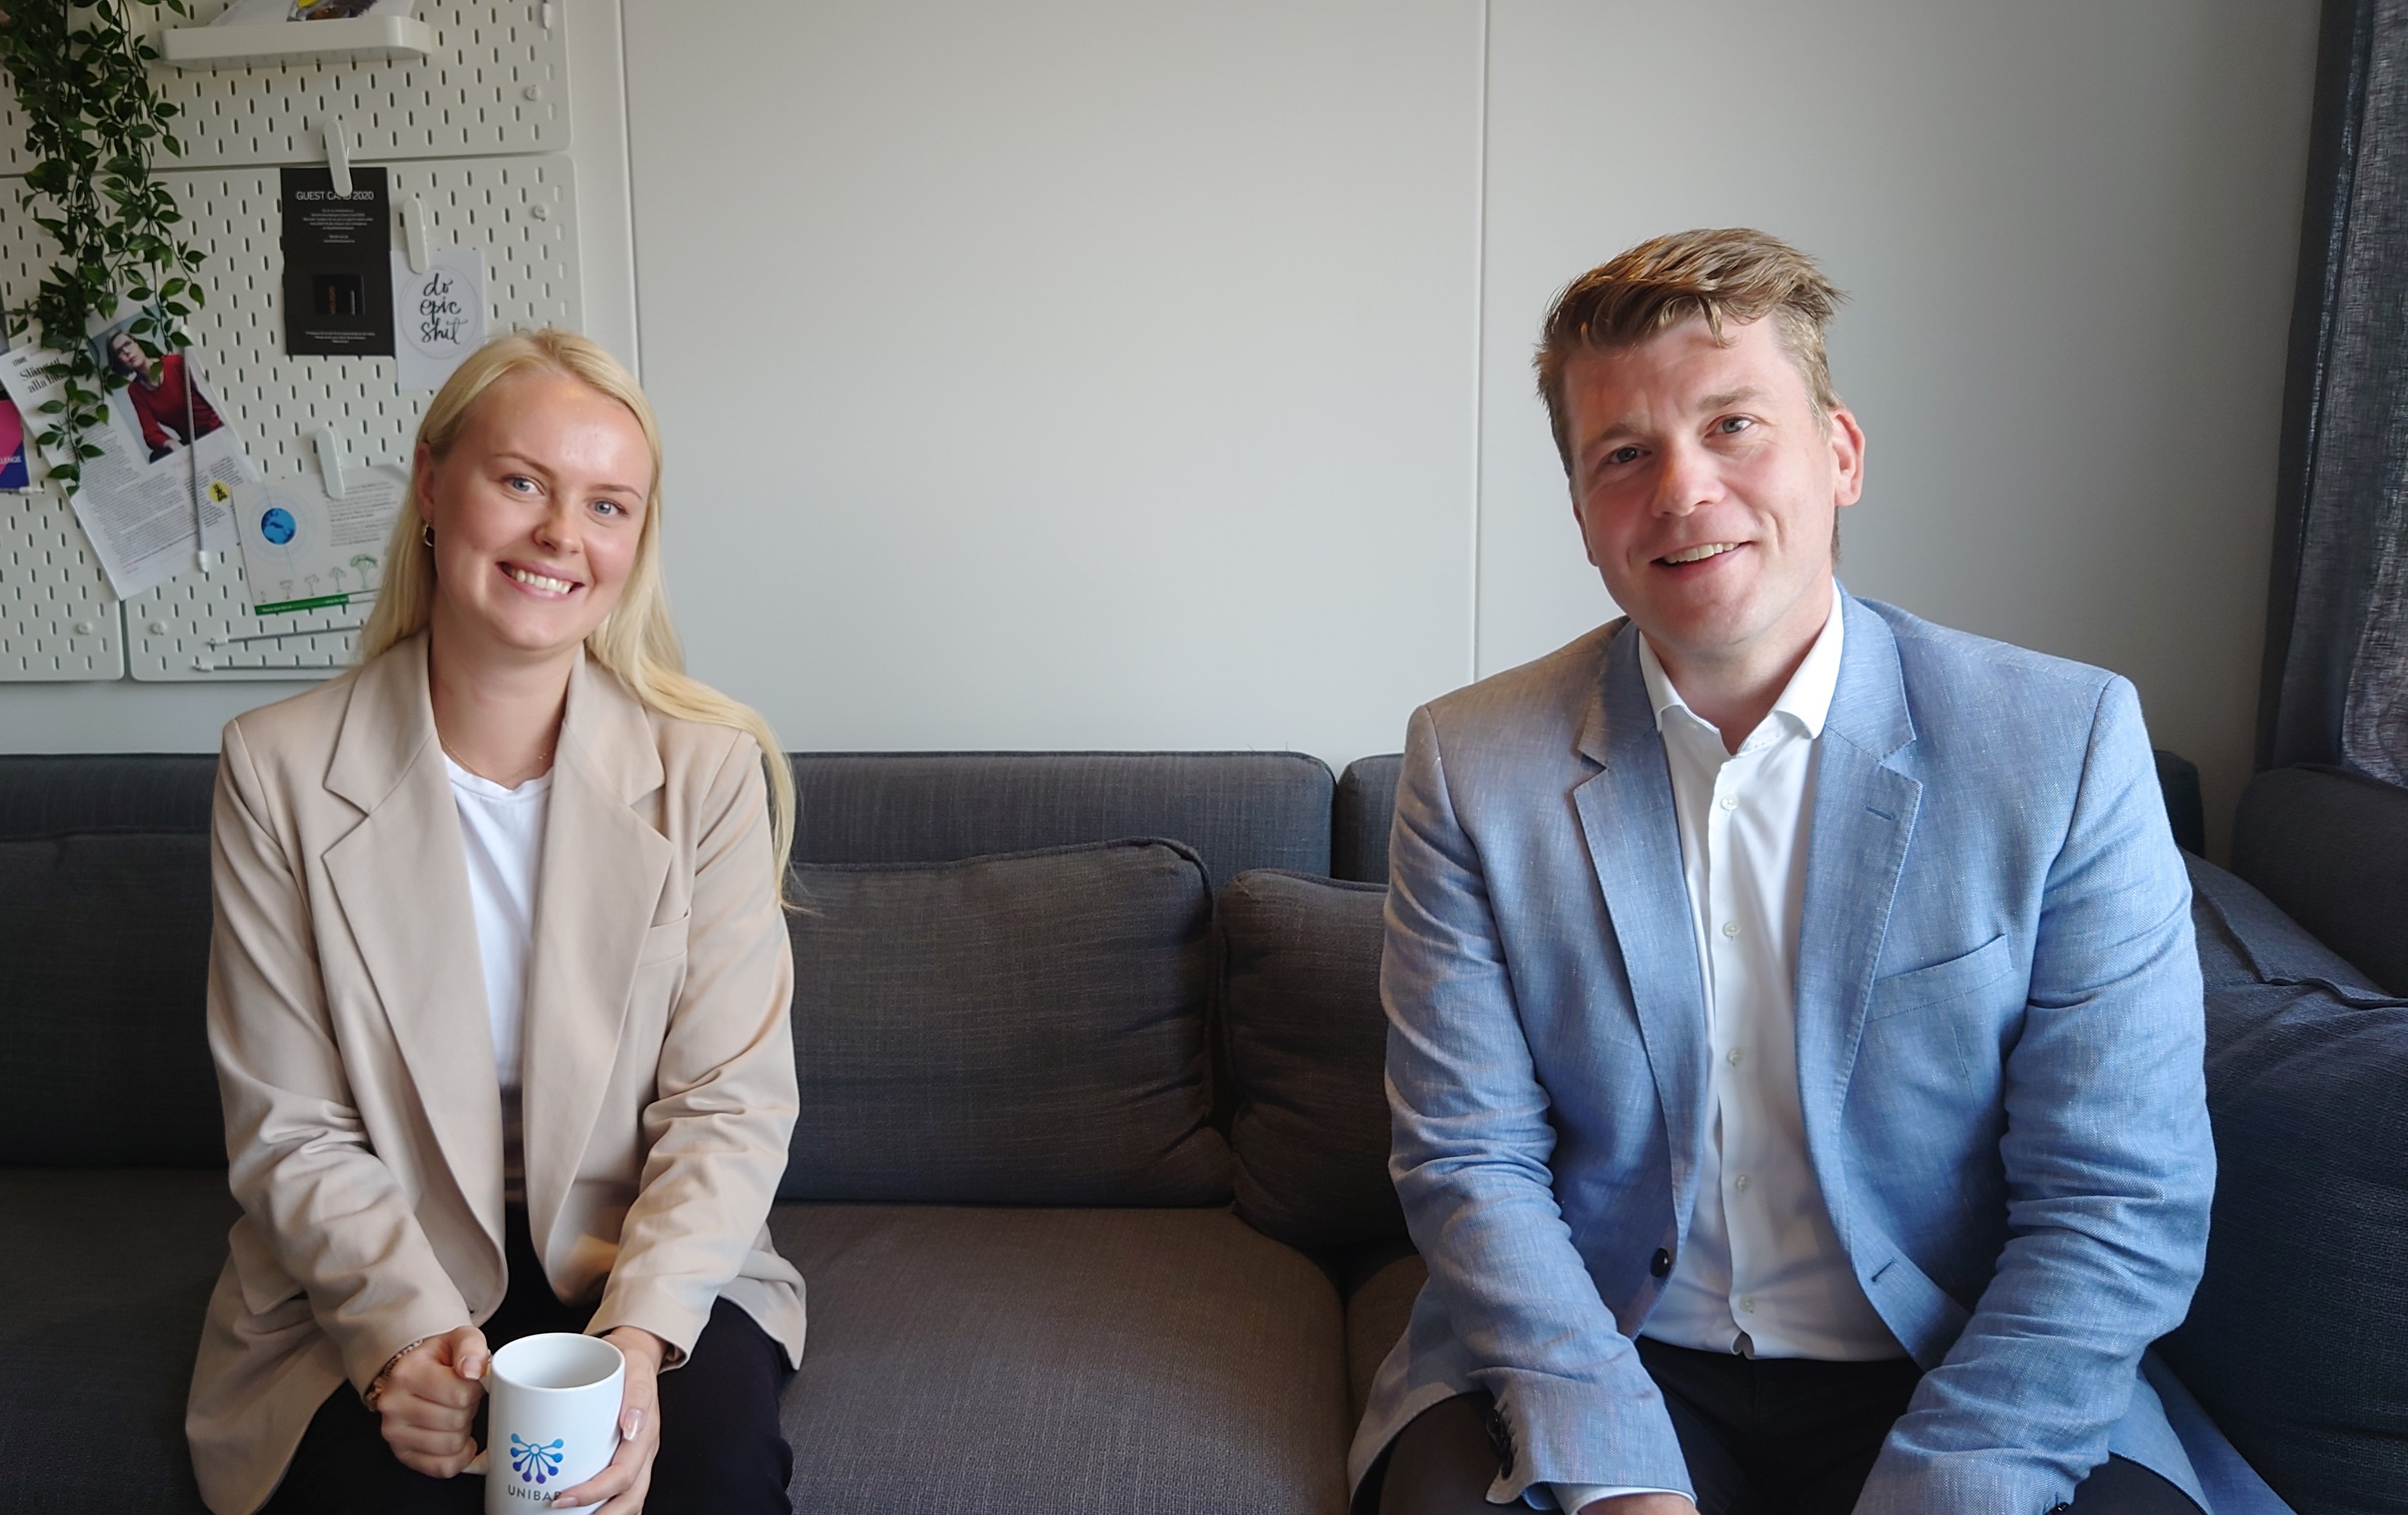 Unibap — Get to know our colleagues Josefine and Søren